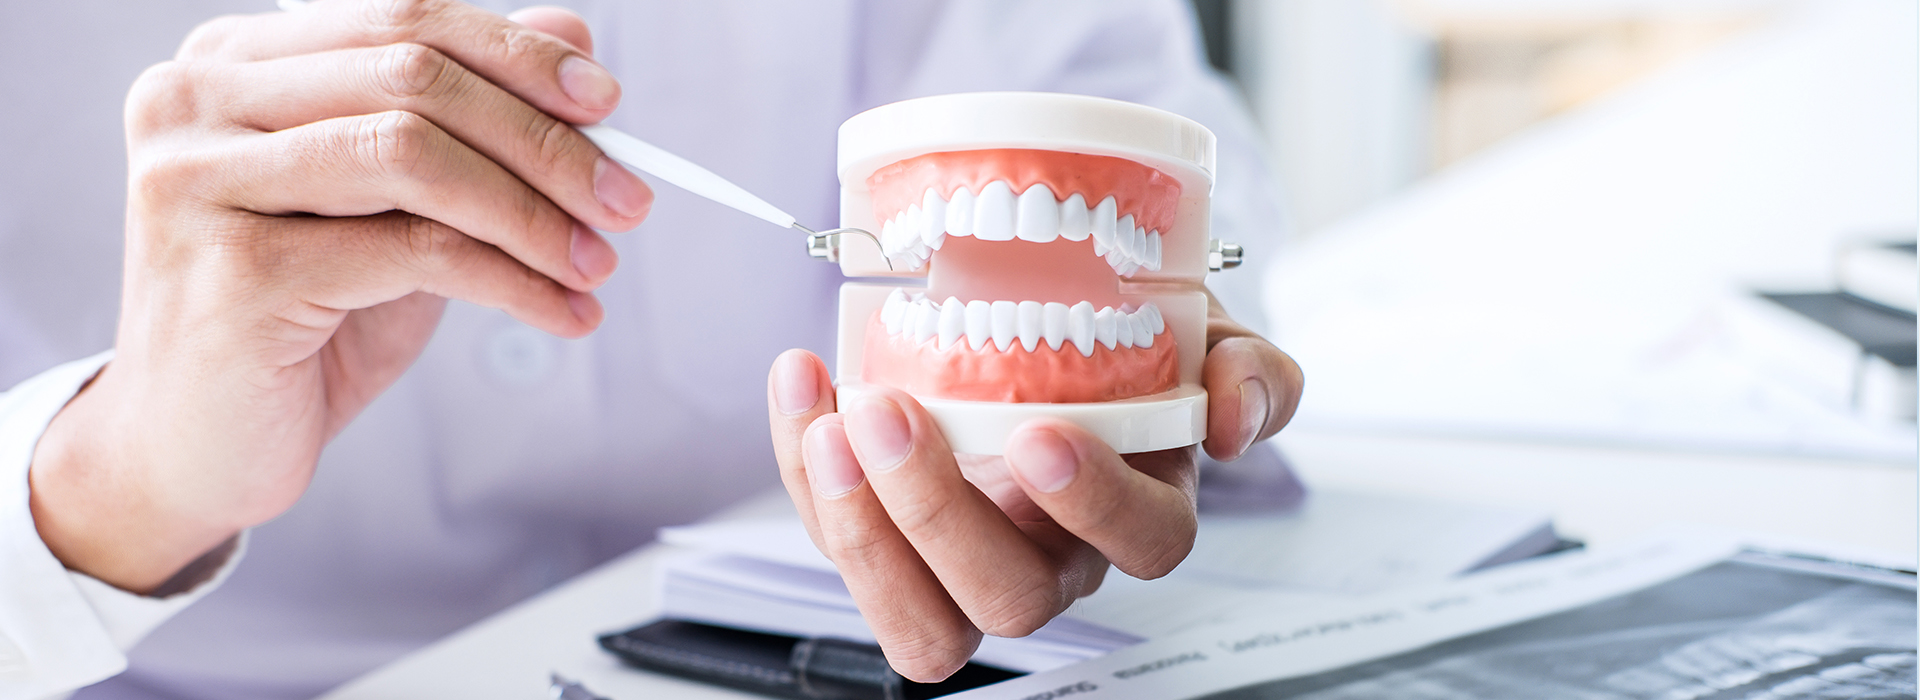 Modern Dental Care of Queens | Implant Dentistry, Dental Fillings and Emergency Treatment